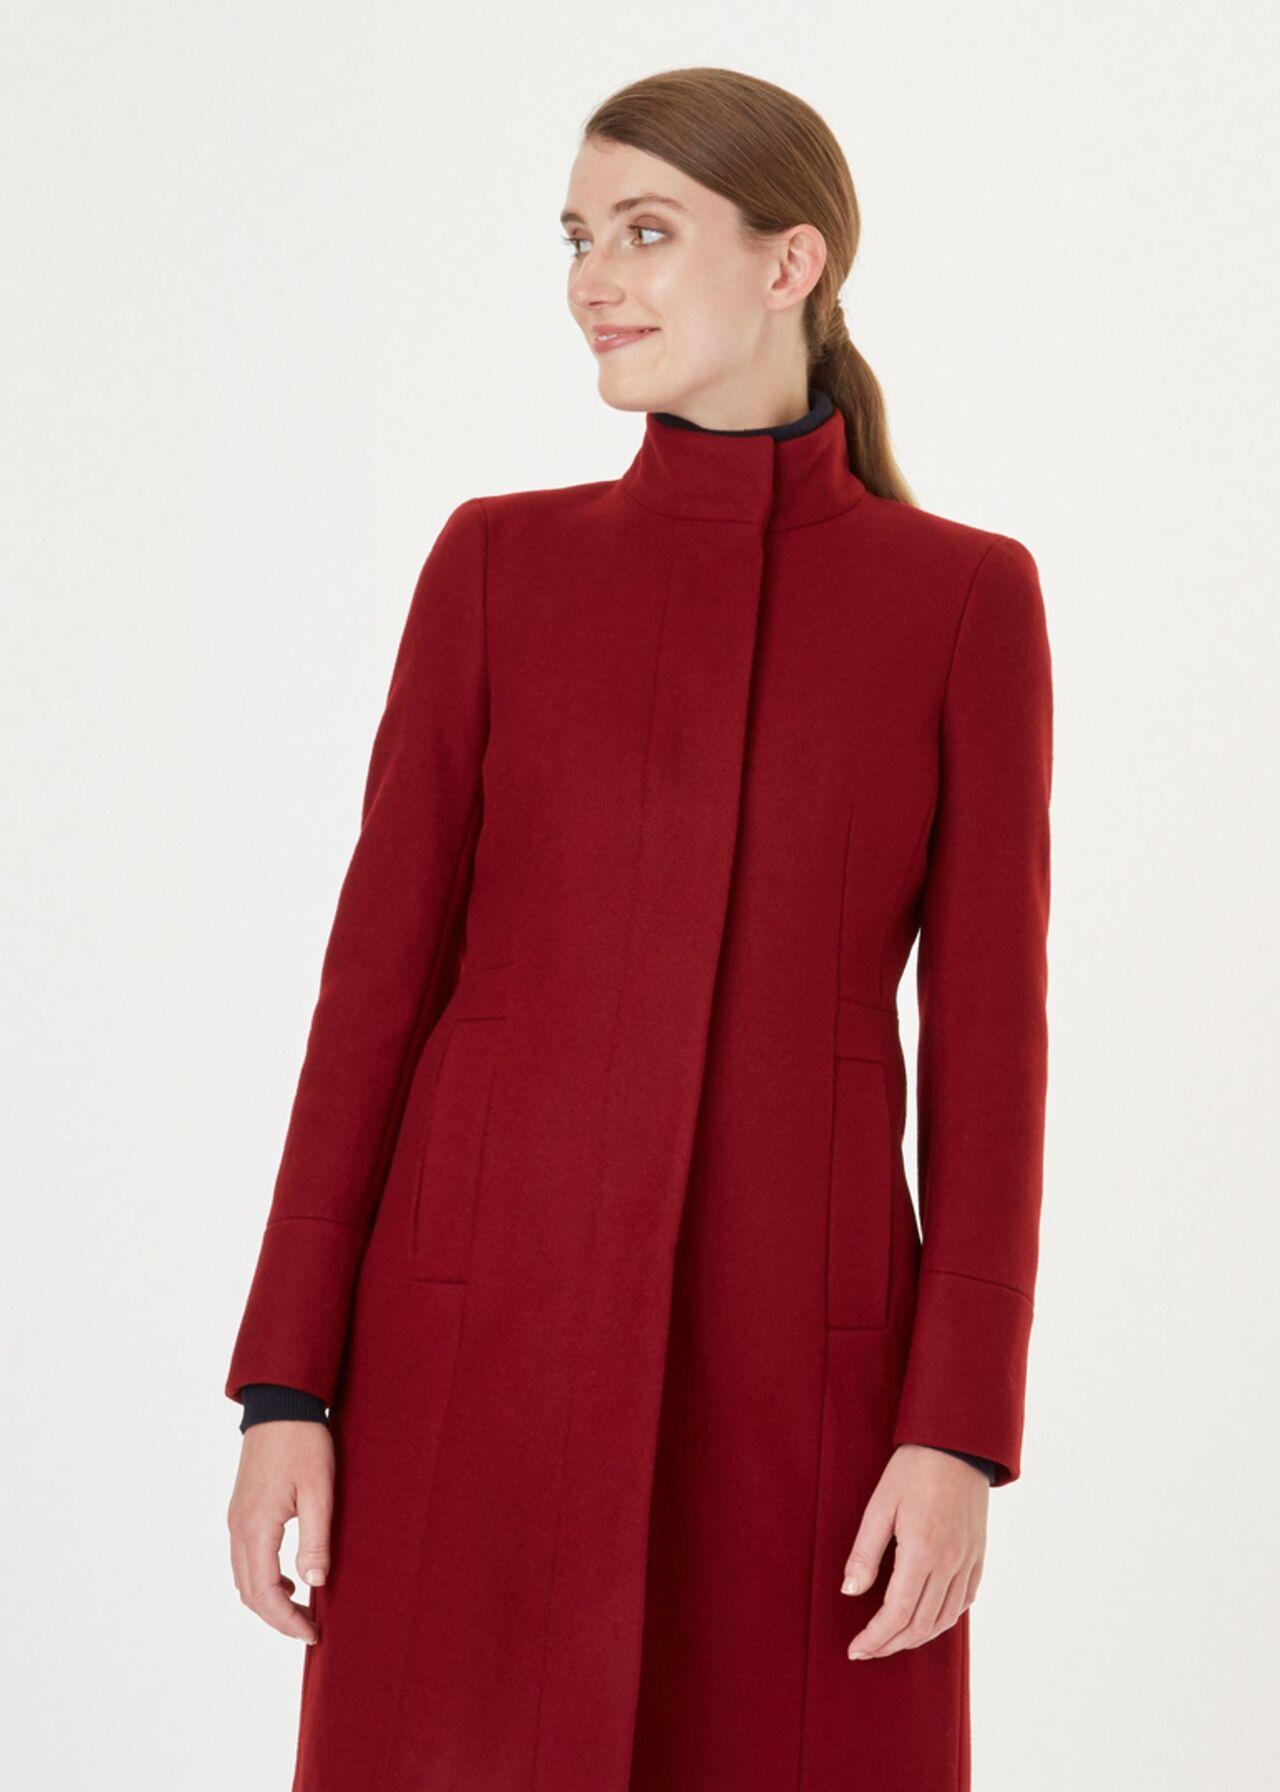 Hobbs Athena Wool Blend Coat in Berry (Red) - Lyst